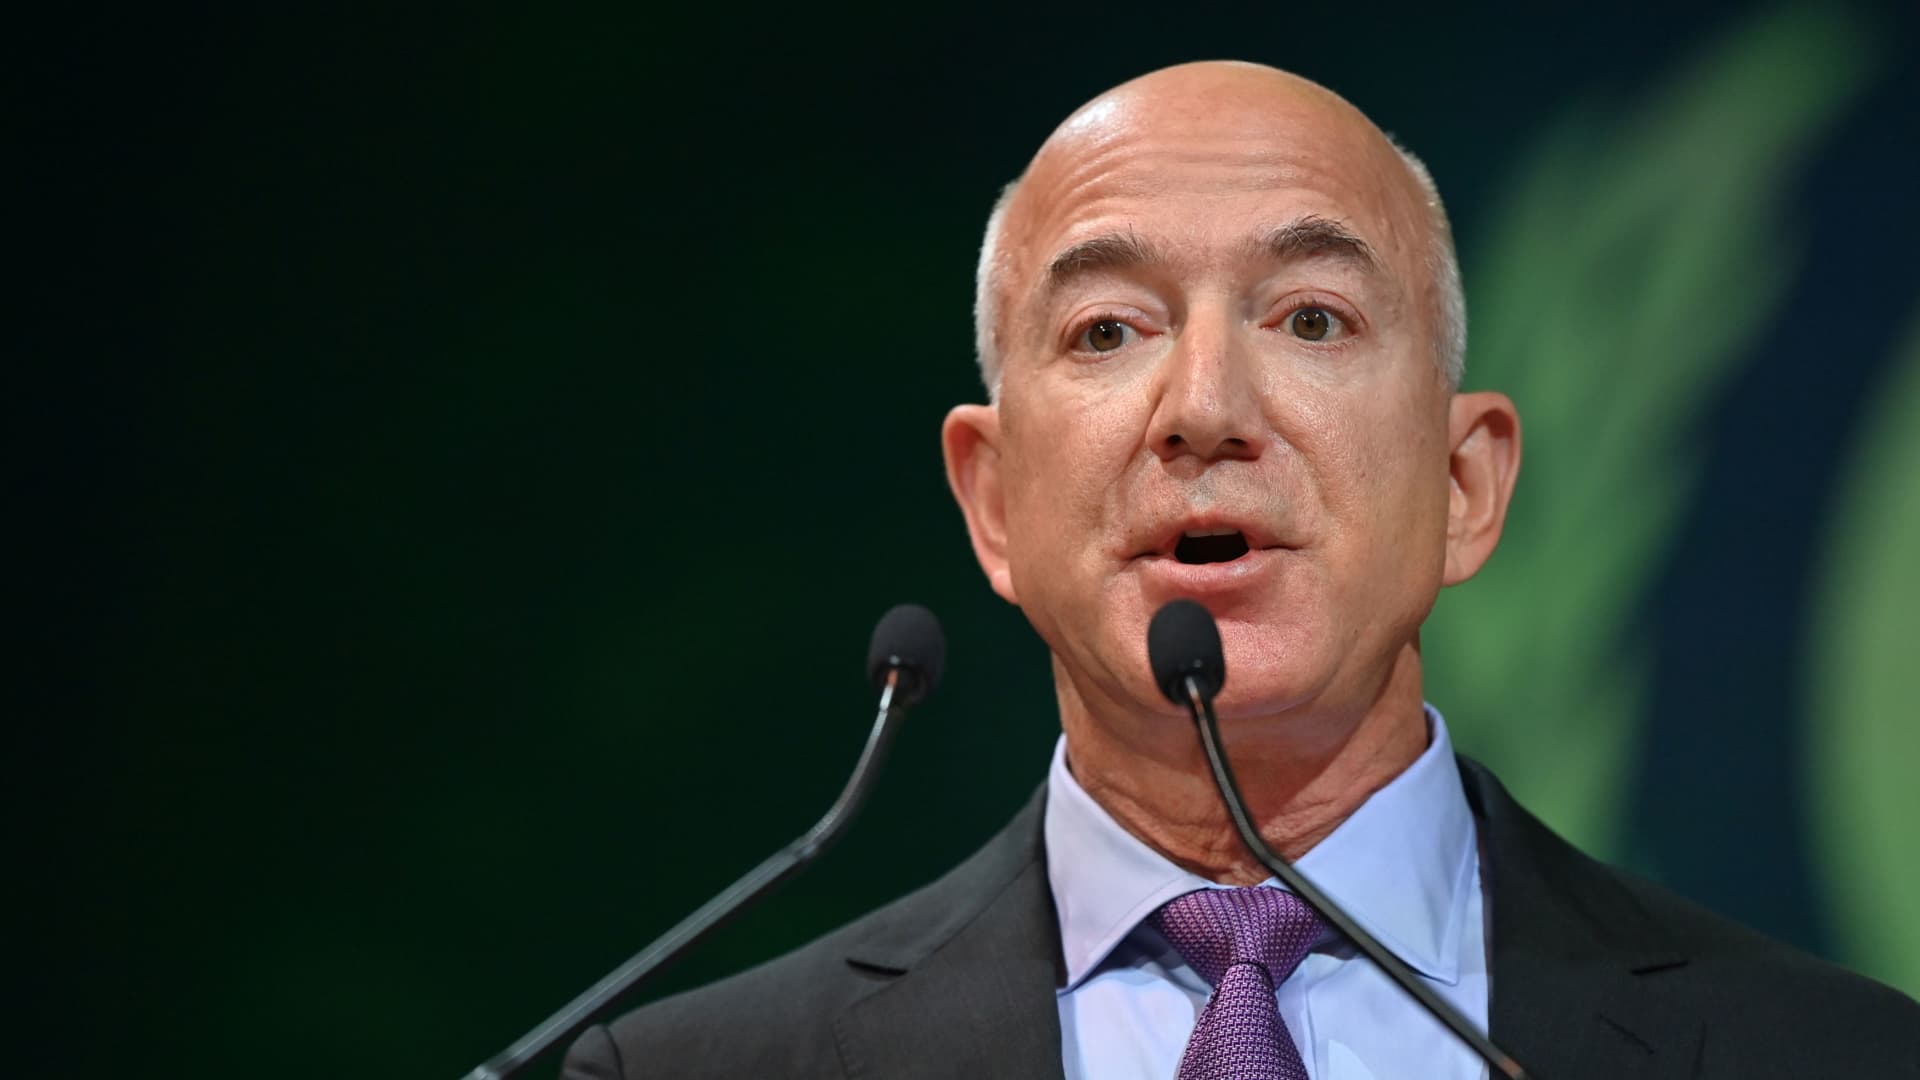 Bezos urges consumers and business owners to reduce risk in the face of a likely recession